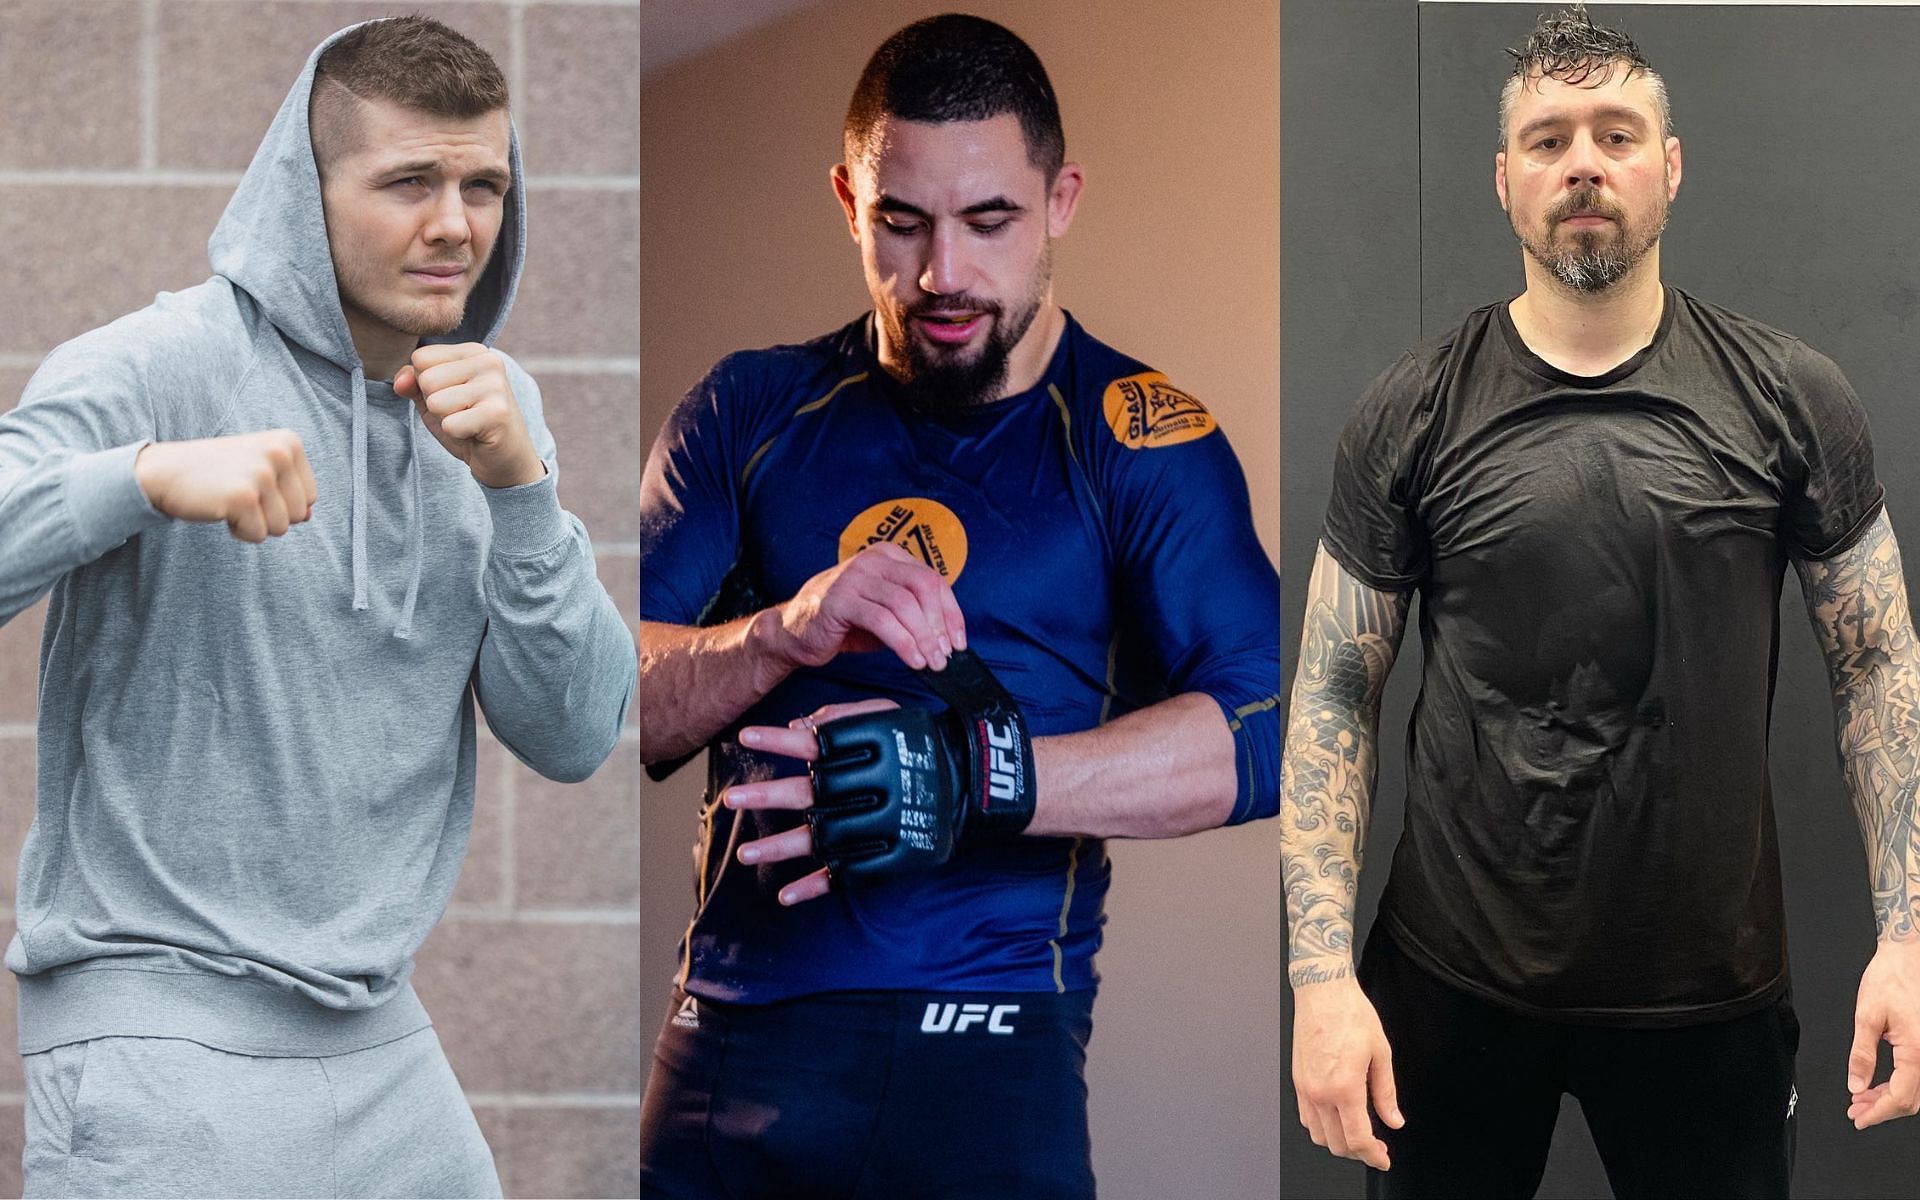 Marvin Vettori, Robert Whittaker, and Dan Hardy (left, center, and right; images courtesy of @marvinvettori, @robwhittakermma, and @danhardymma Instagram)